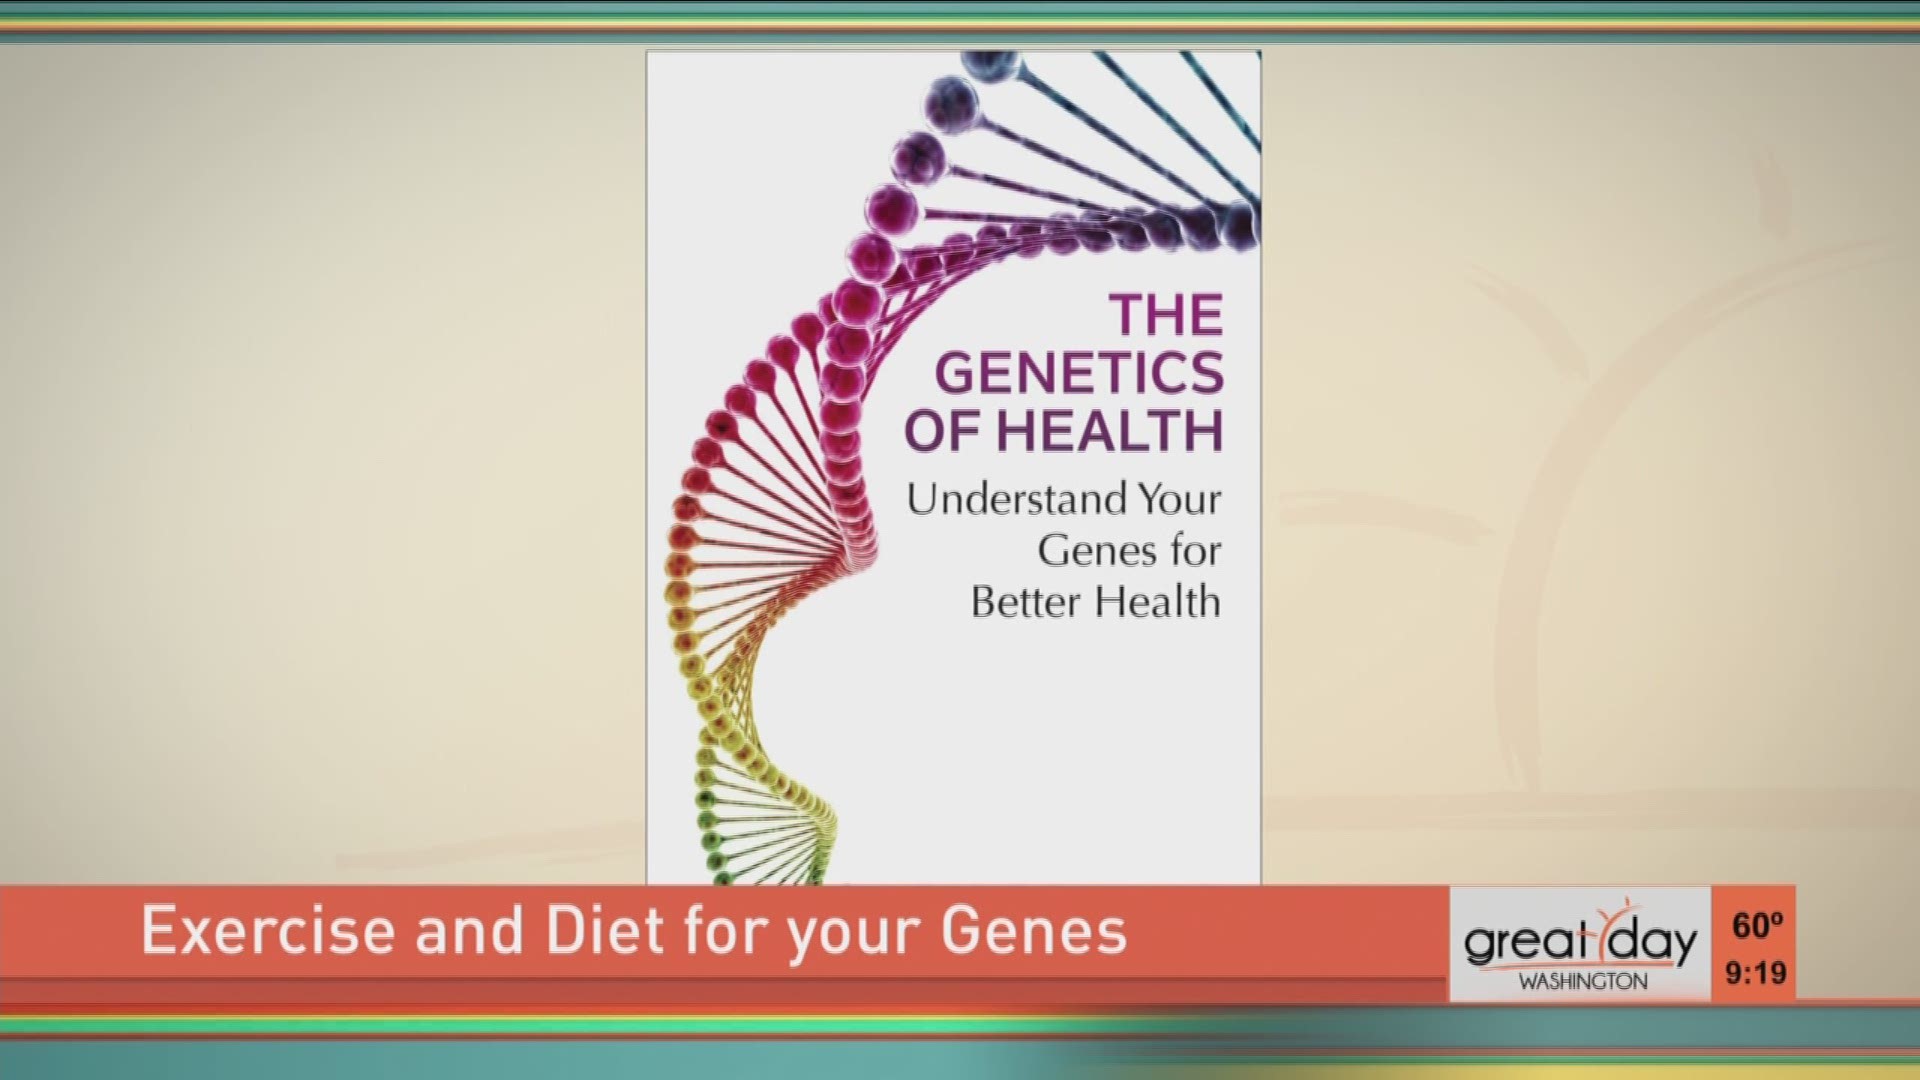 Dr. Sharad Paul author of, "The Genetics of Health", says your genes not only dictate your physical appearance, they can also shape the way you behave.